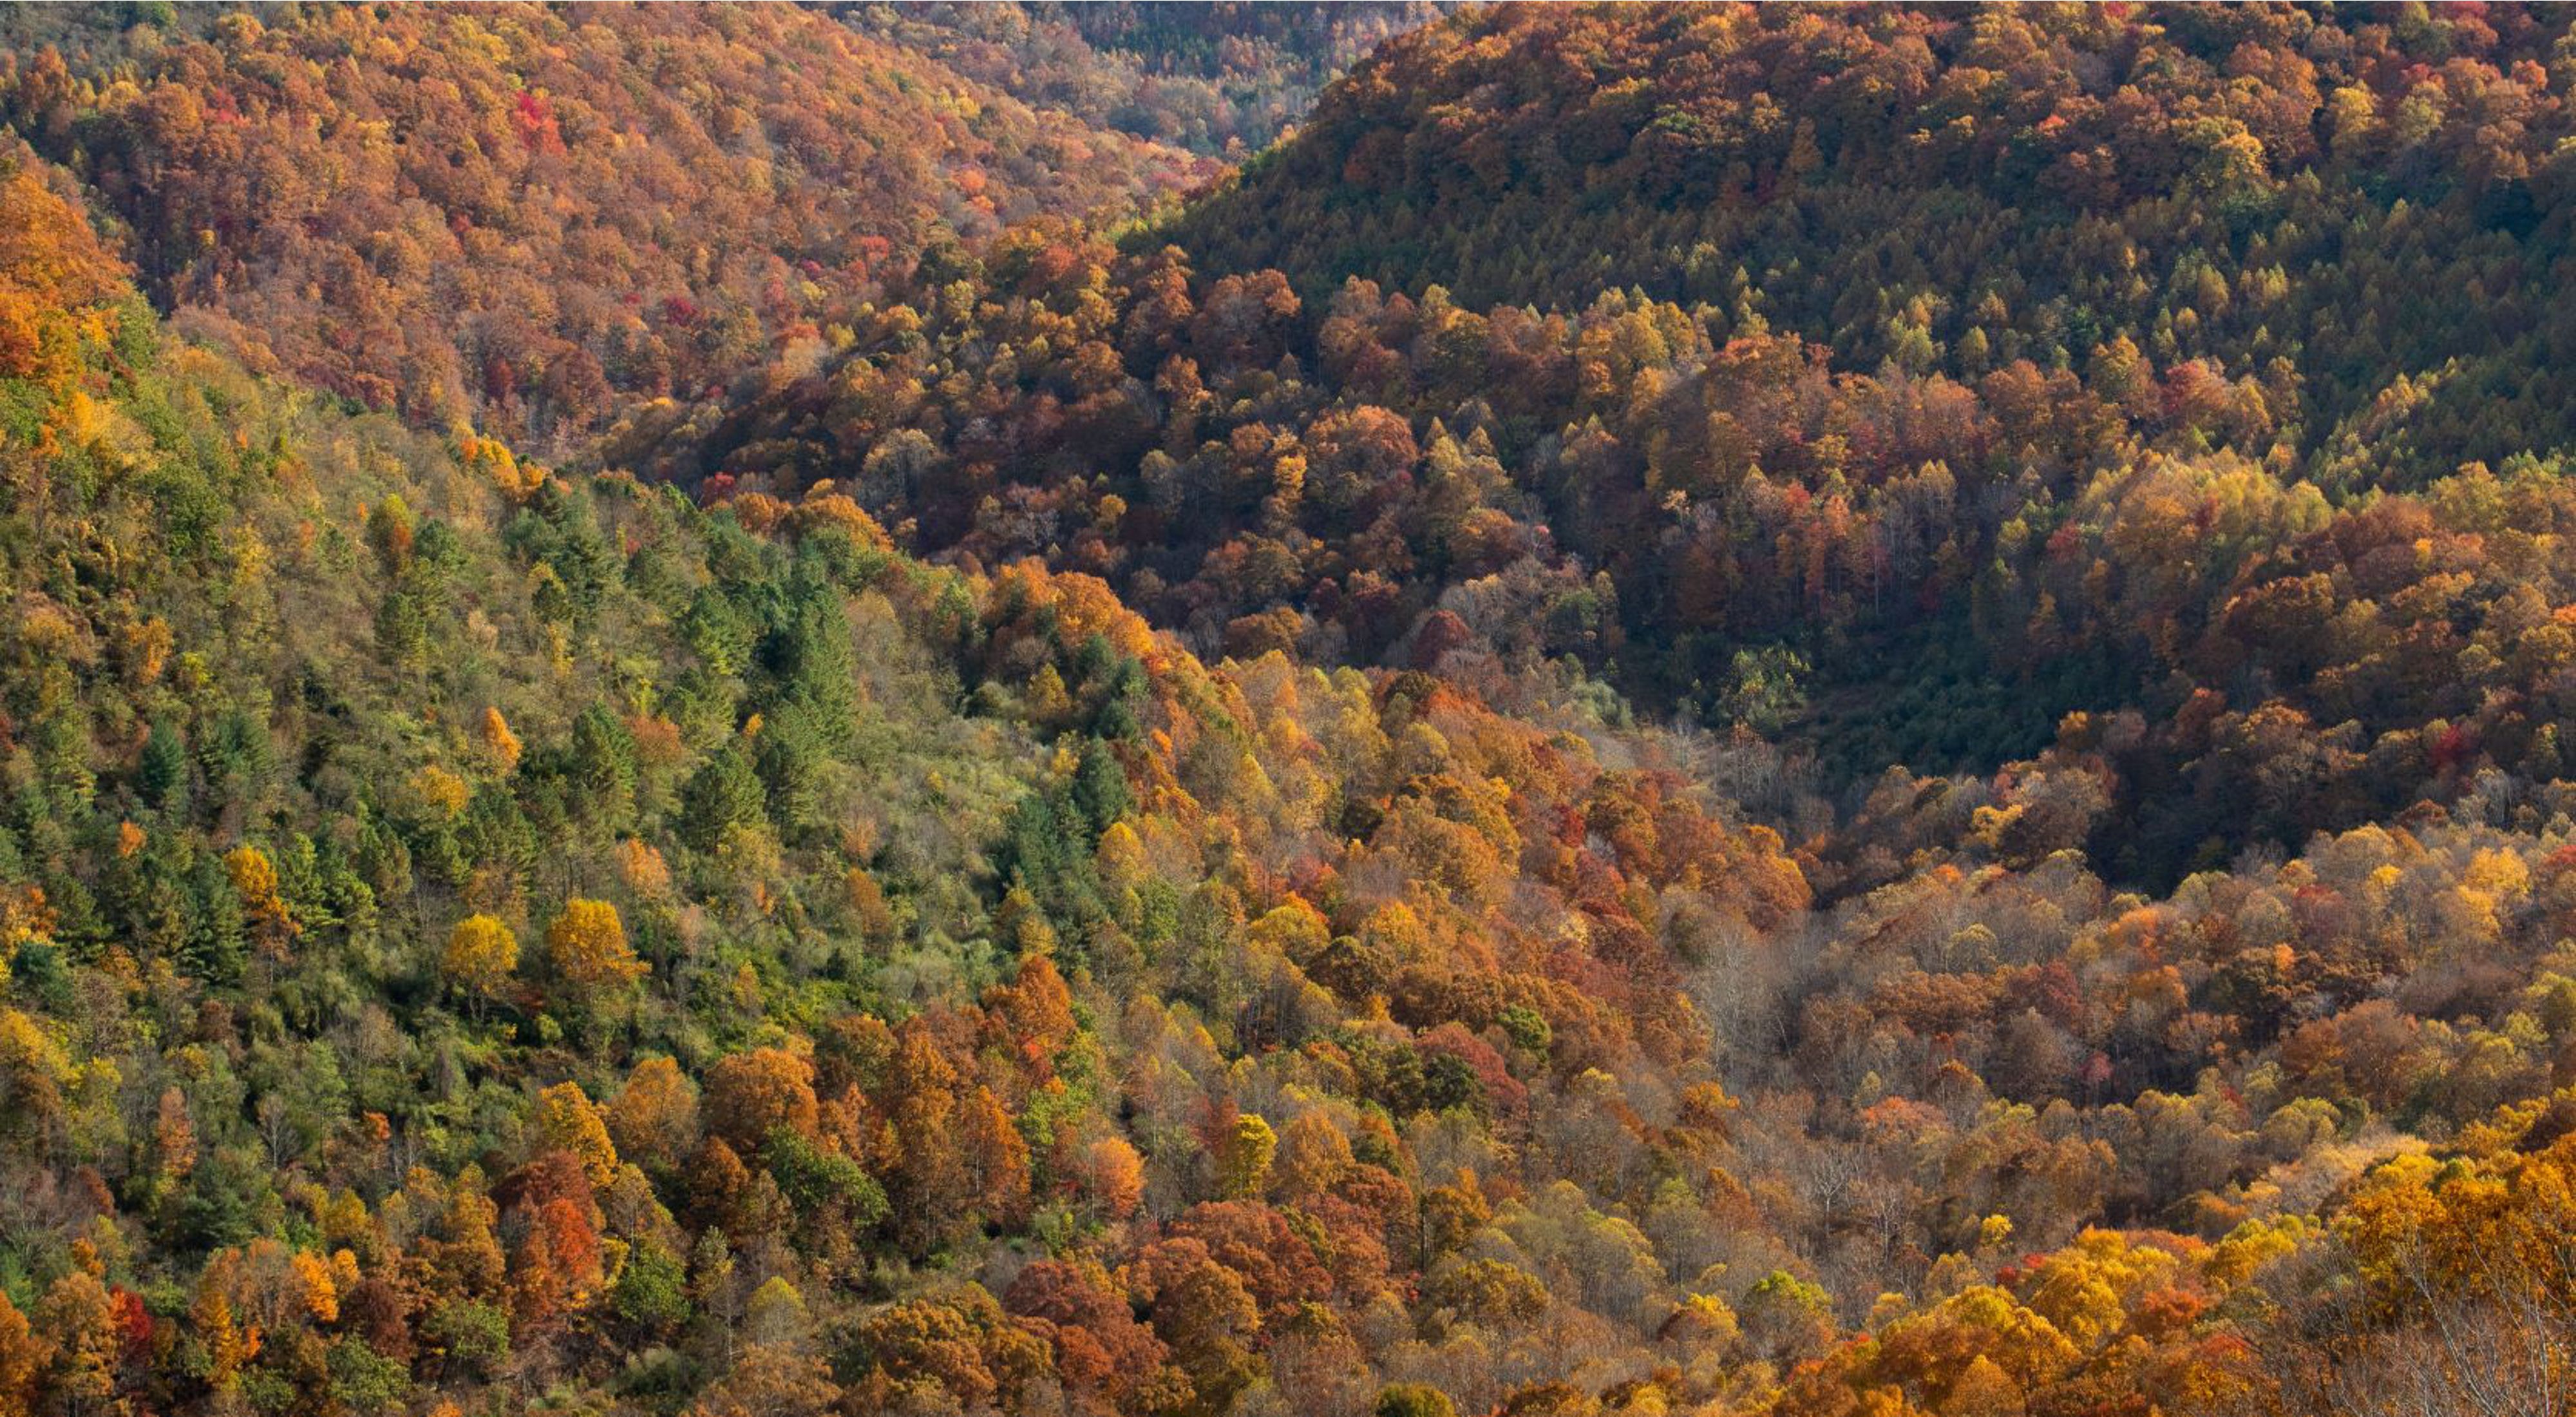 Colorful mountains in the fall with a blue gray sky above them.